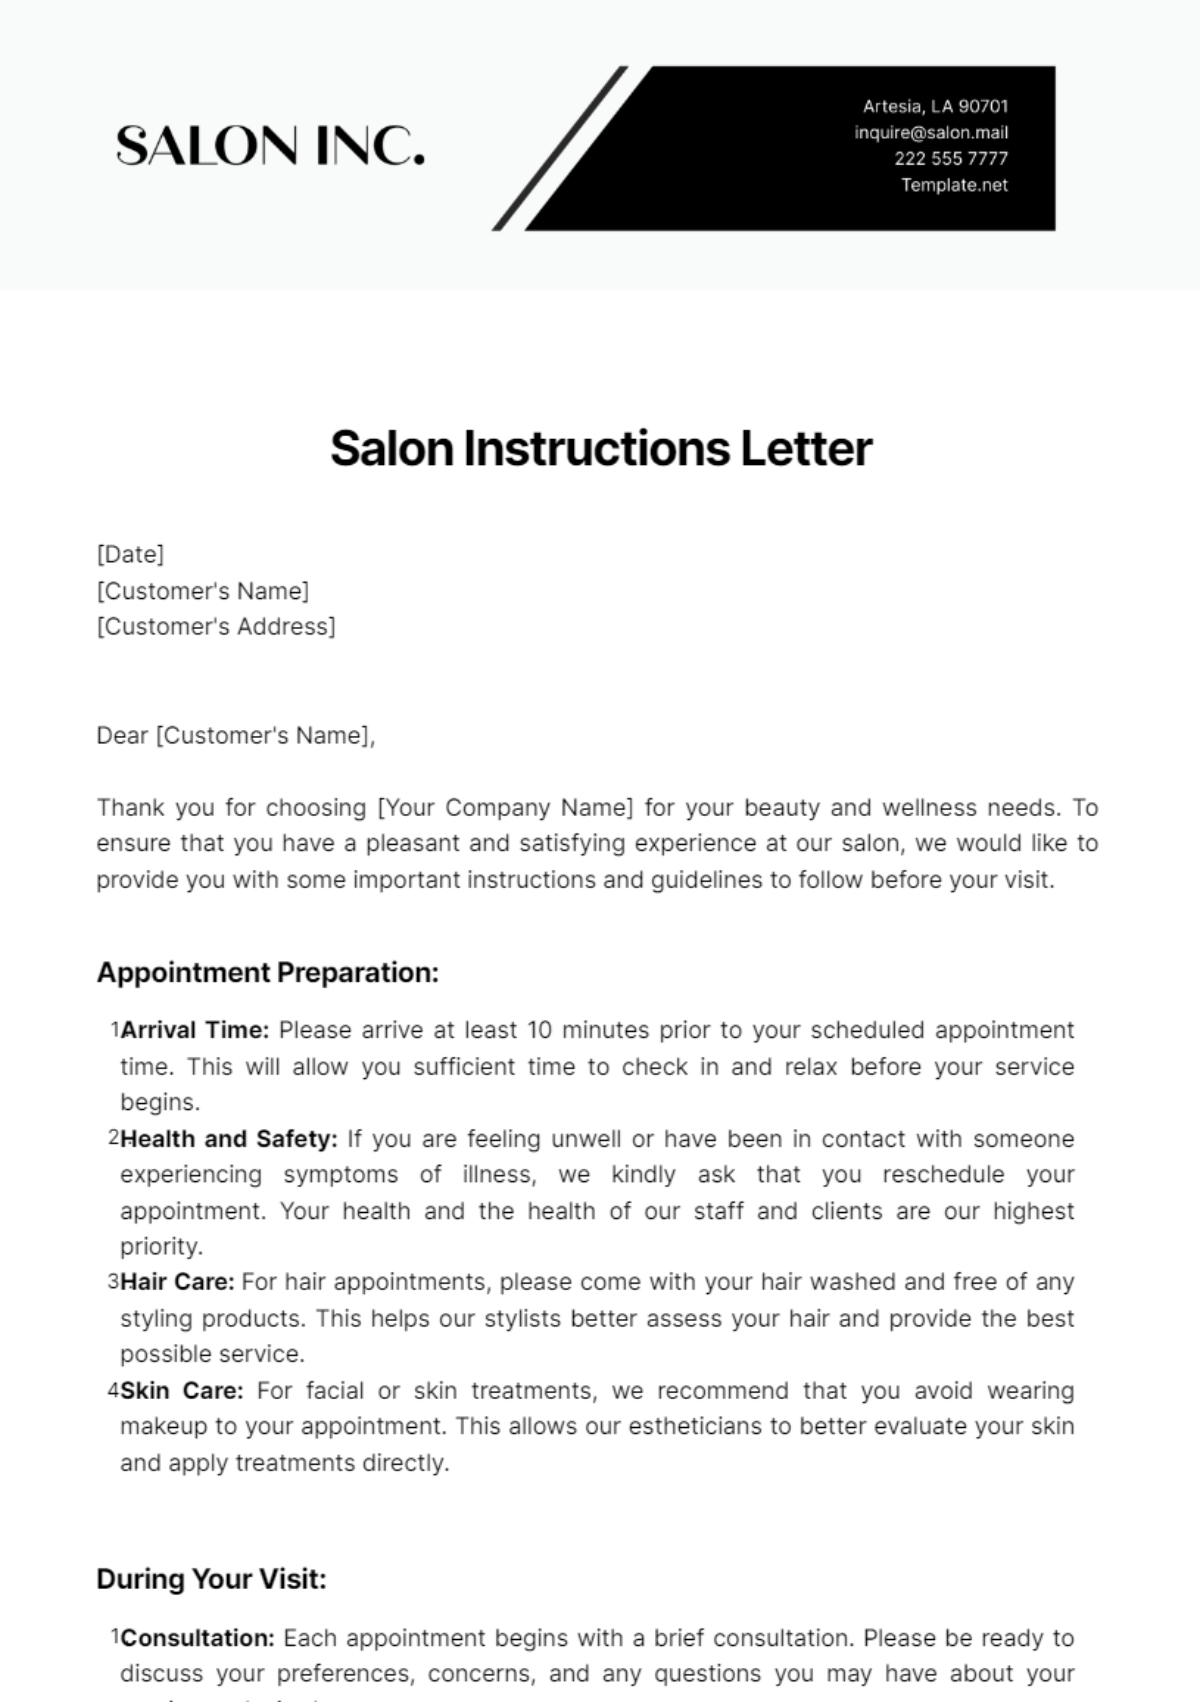 Free Salon Instructions Letter Template